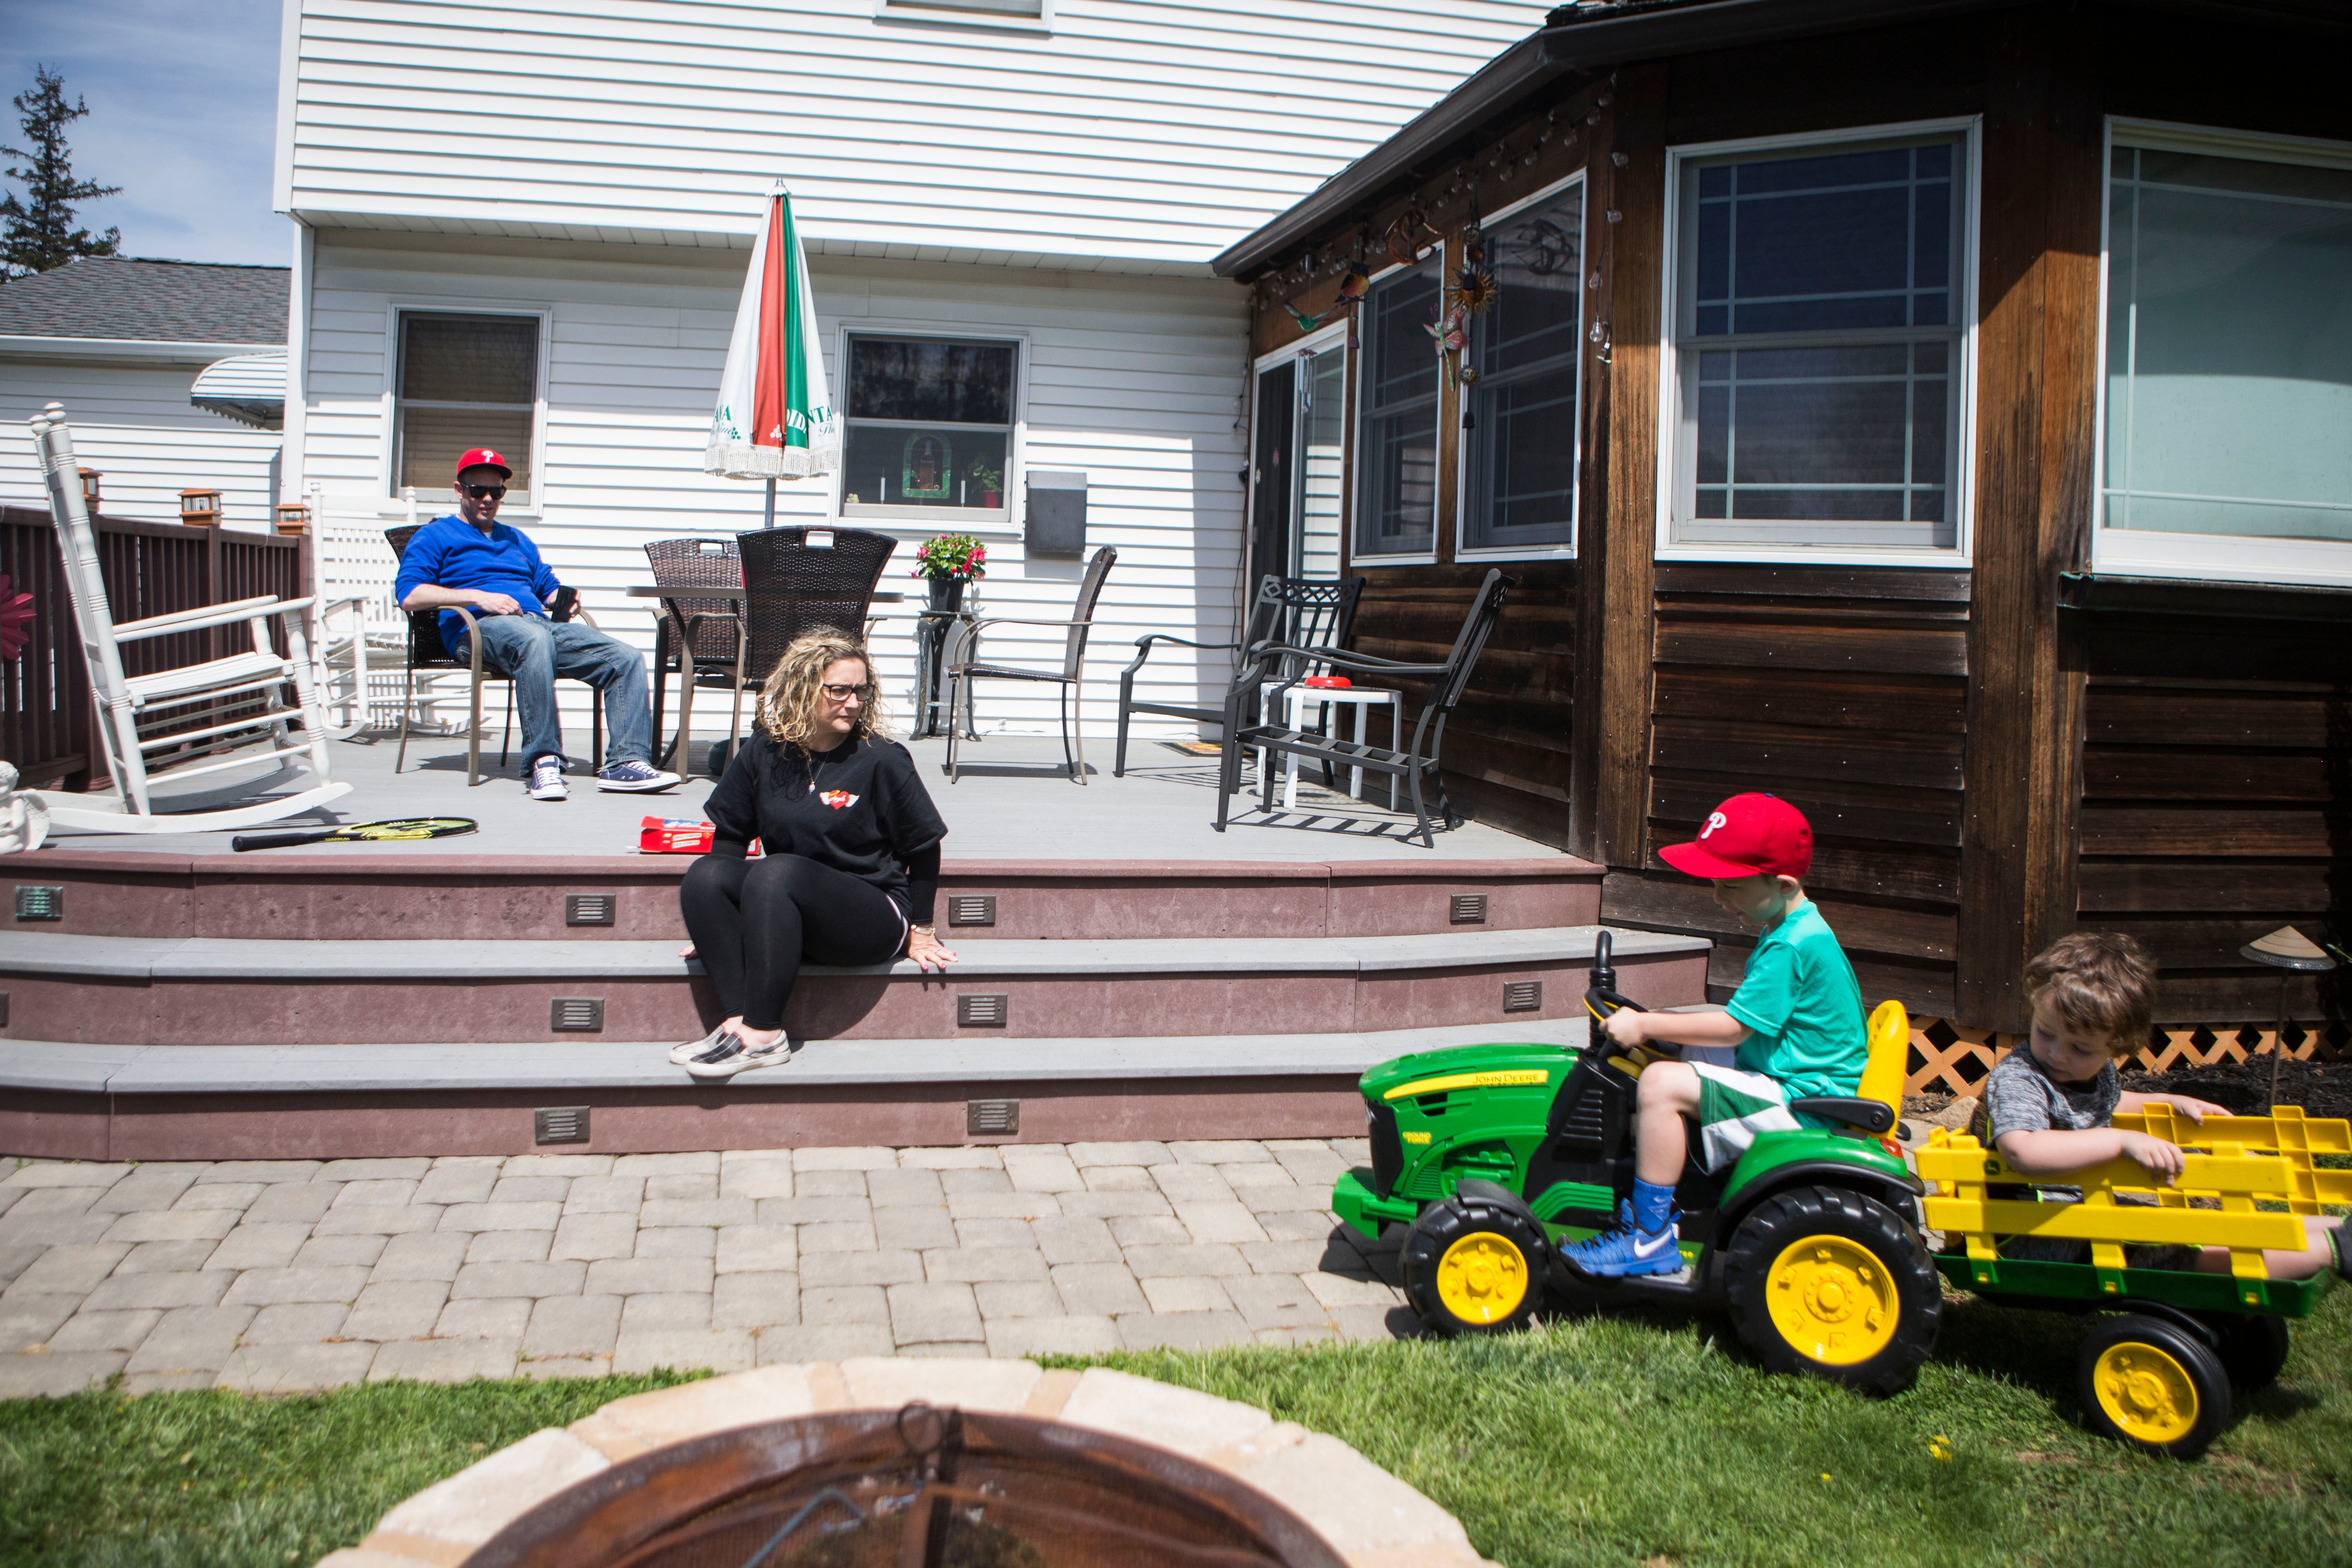 Nicole O'Donnell (right) spends a Sunday with family at her parent's home in Delaware County, Pennsylvania. (Jessica Kourkounis/For Keystone Crossroads)